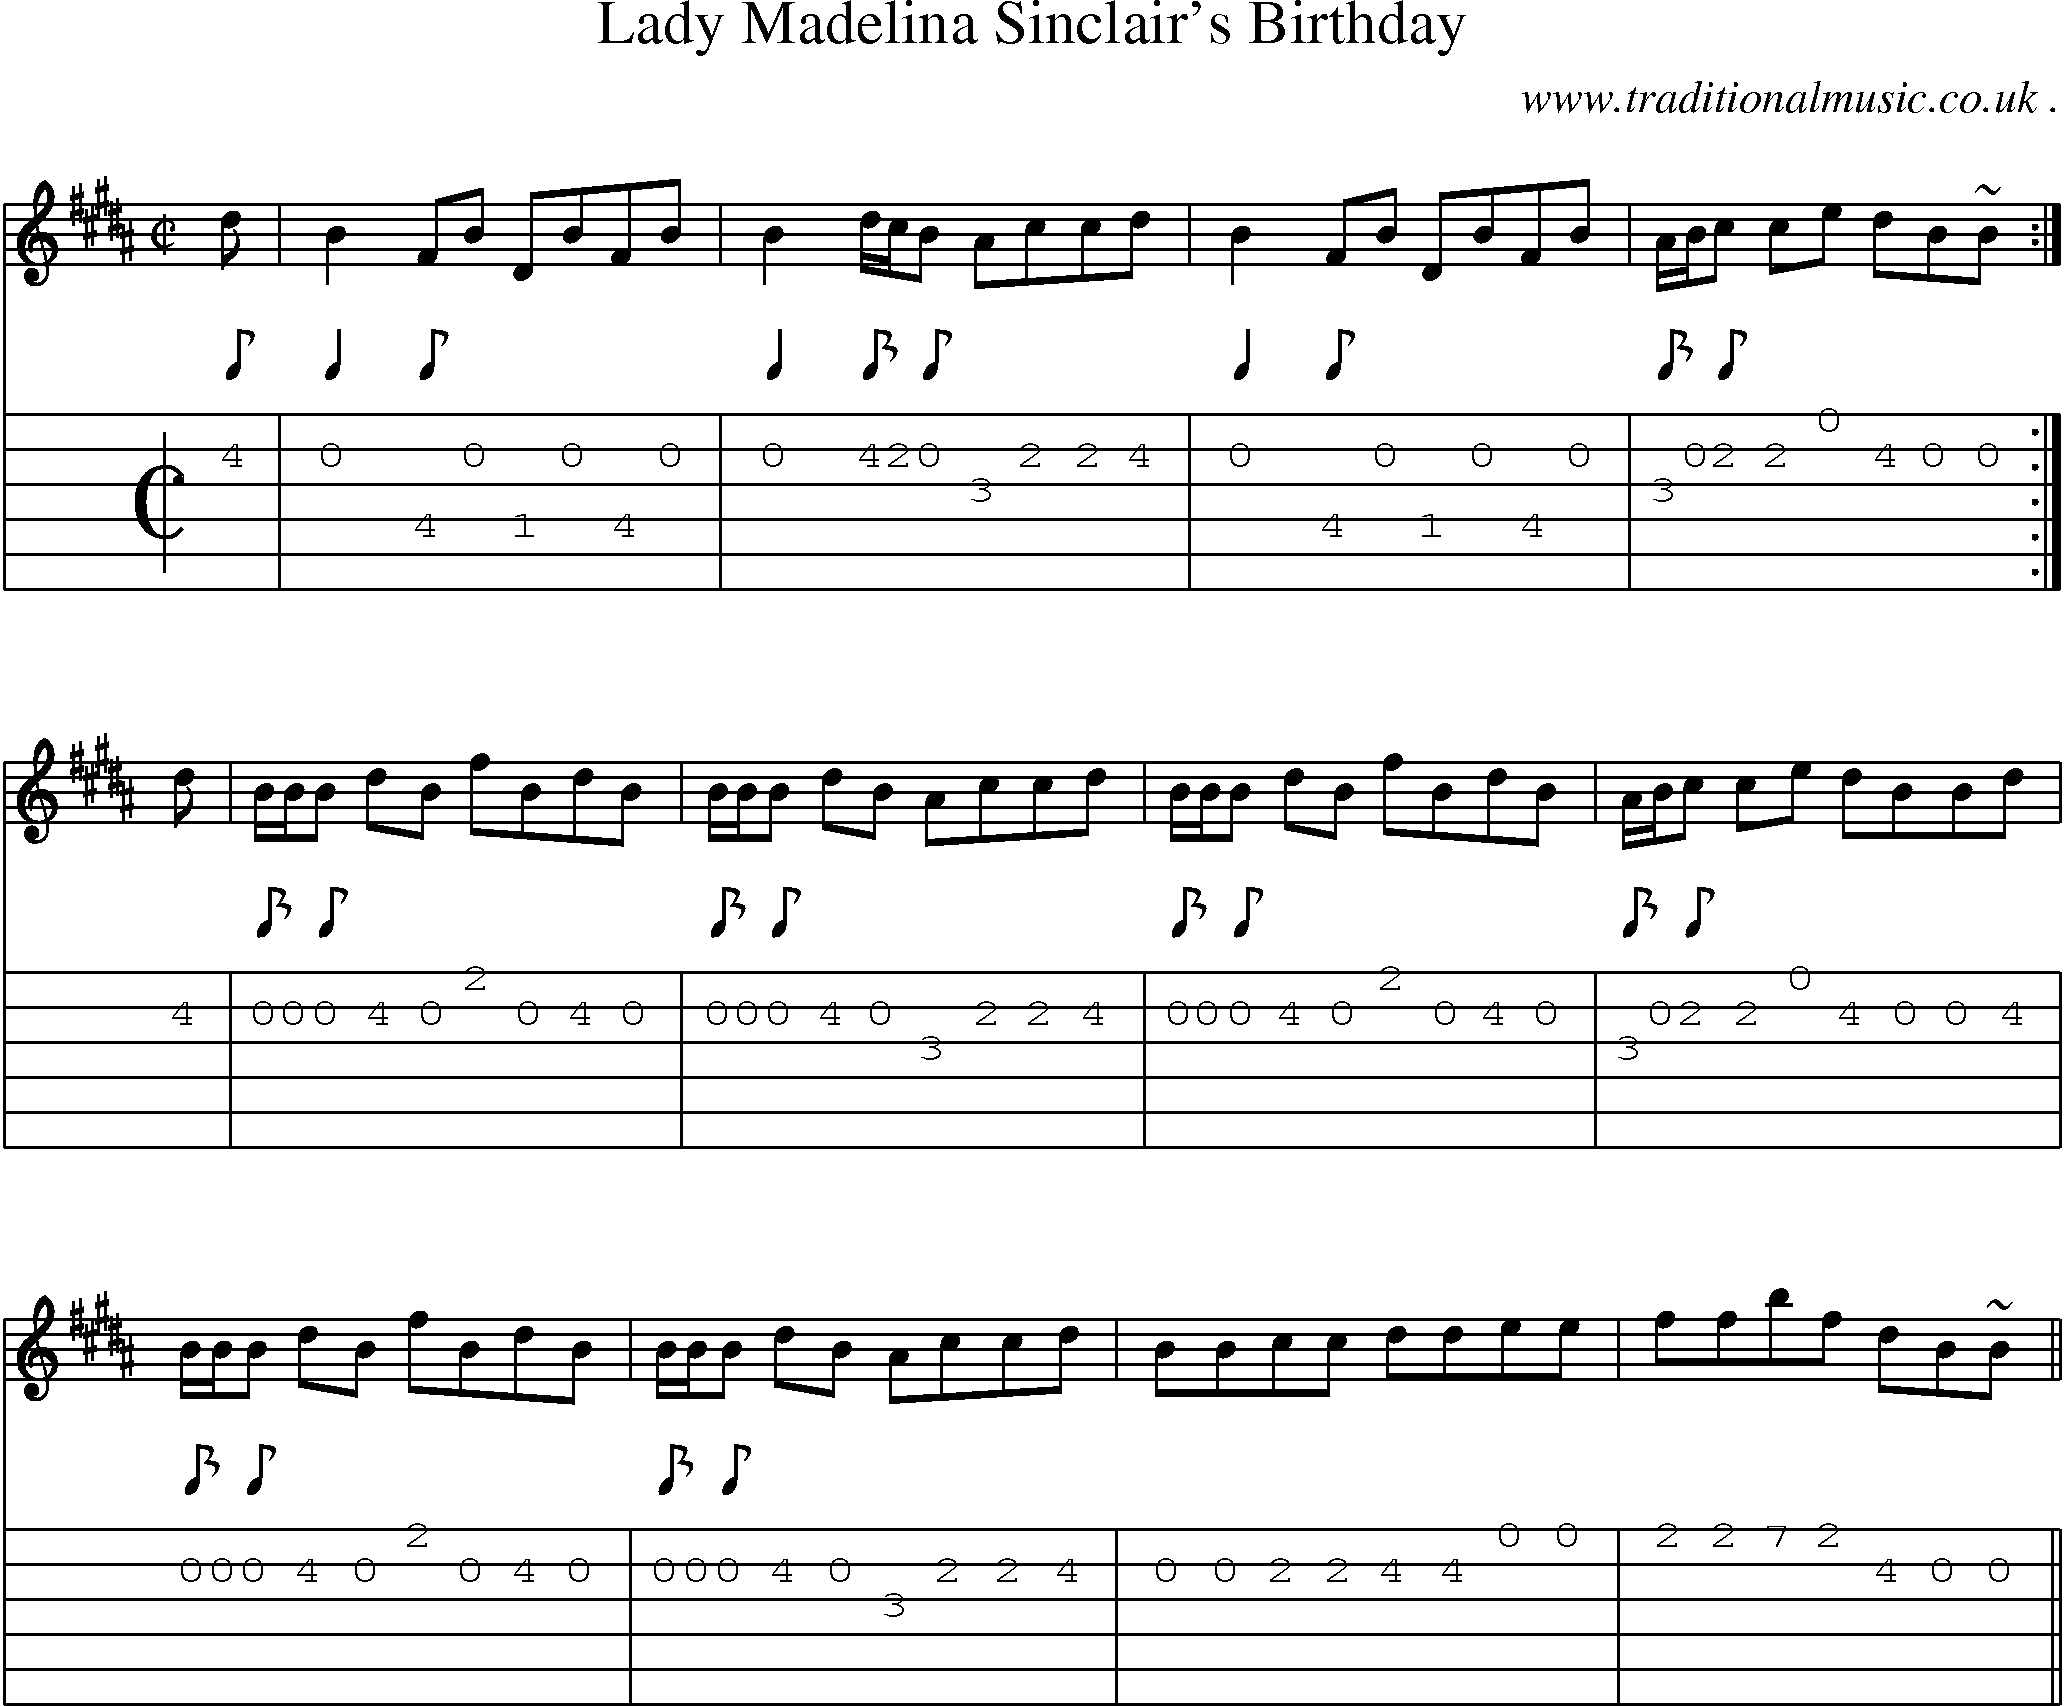 Sheet-music  score, Chords and Guitar Tabs for Lady Madelina Sinclairs Birthday